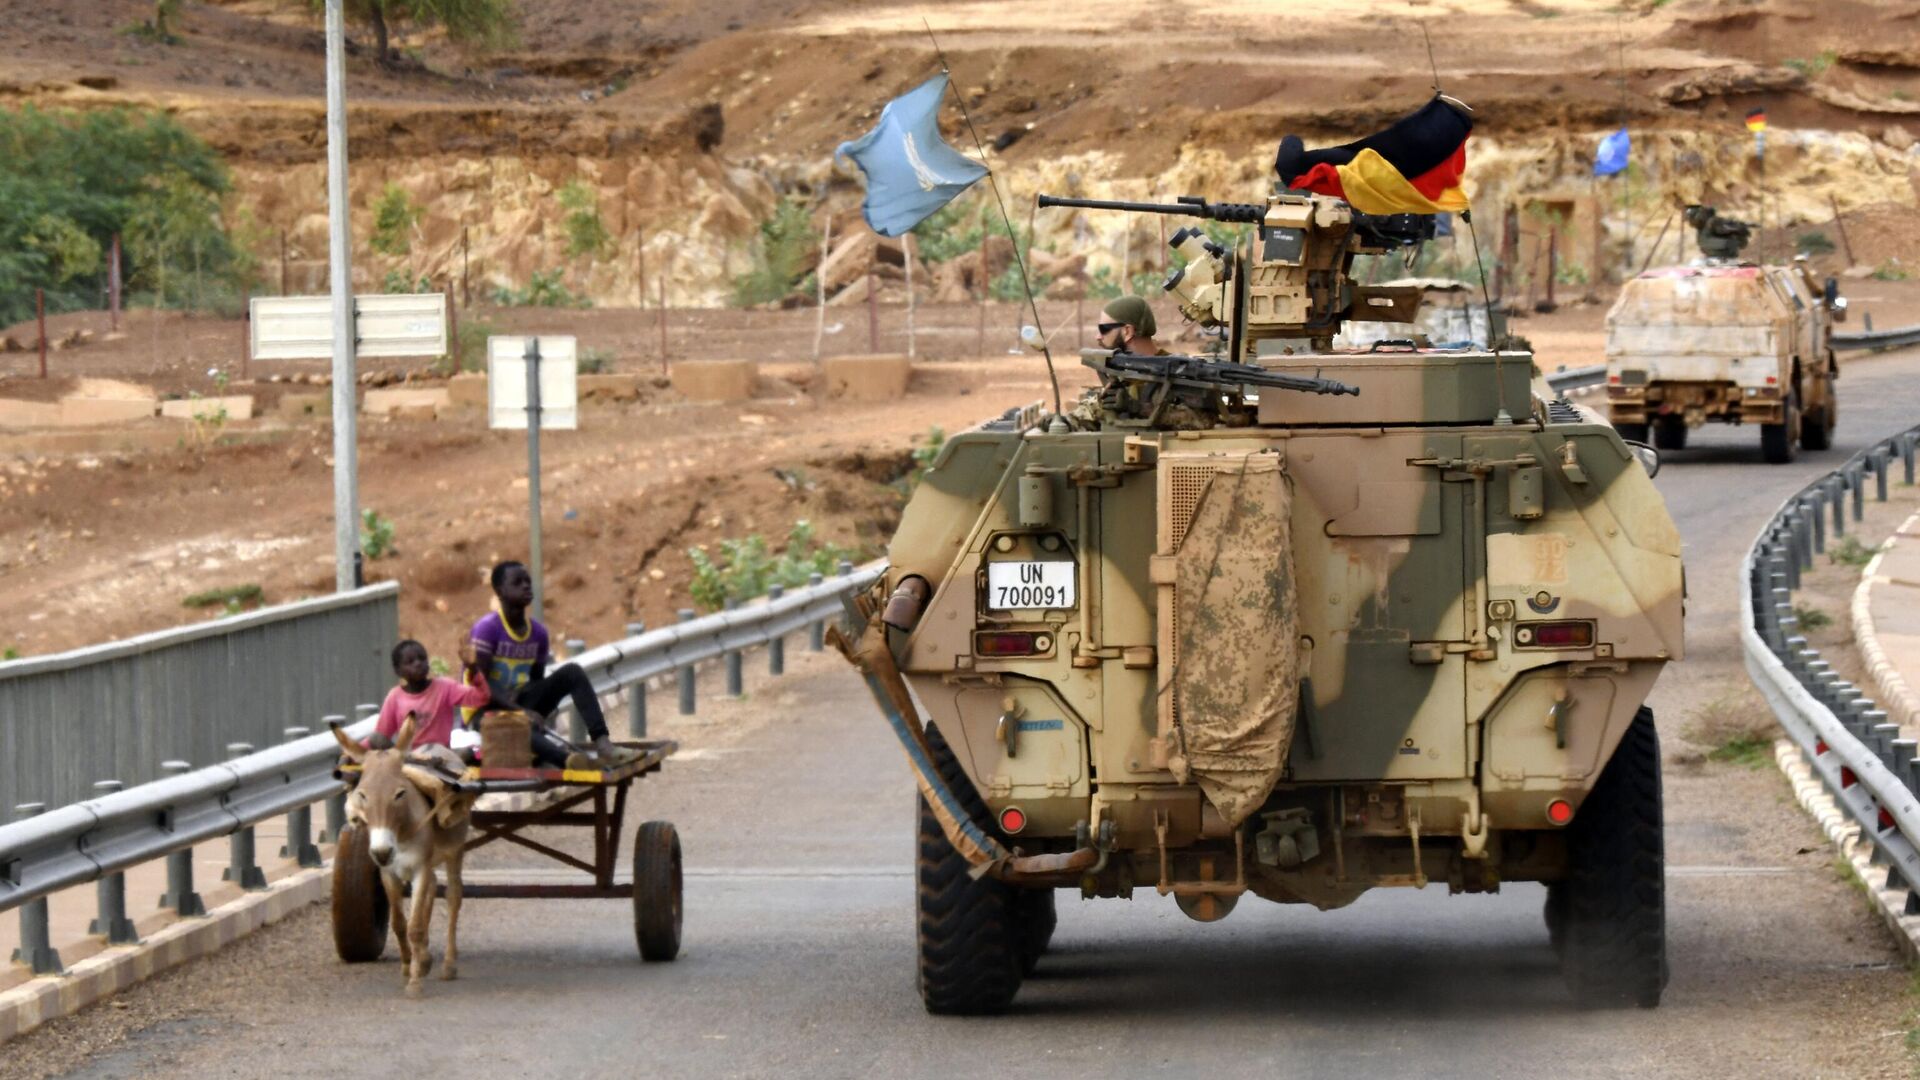 German soldiers from the parachutists detachment of the MINUSMA (United Nations Multidimensional Integrated Stabilization Mission in Mali) cross the Niger river bridge during a patrol searching for IED (improvised explosive device) on the route from Gao to Gossi, Mali on August 2, 2018 - Sputnik International, 1920, 06.09.2022